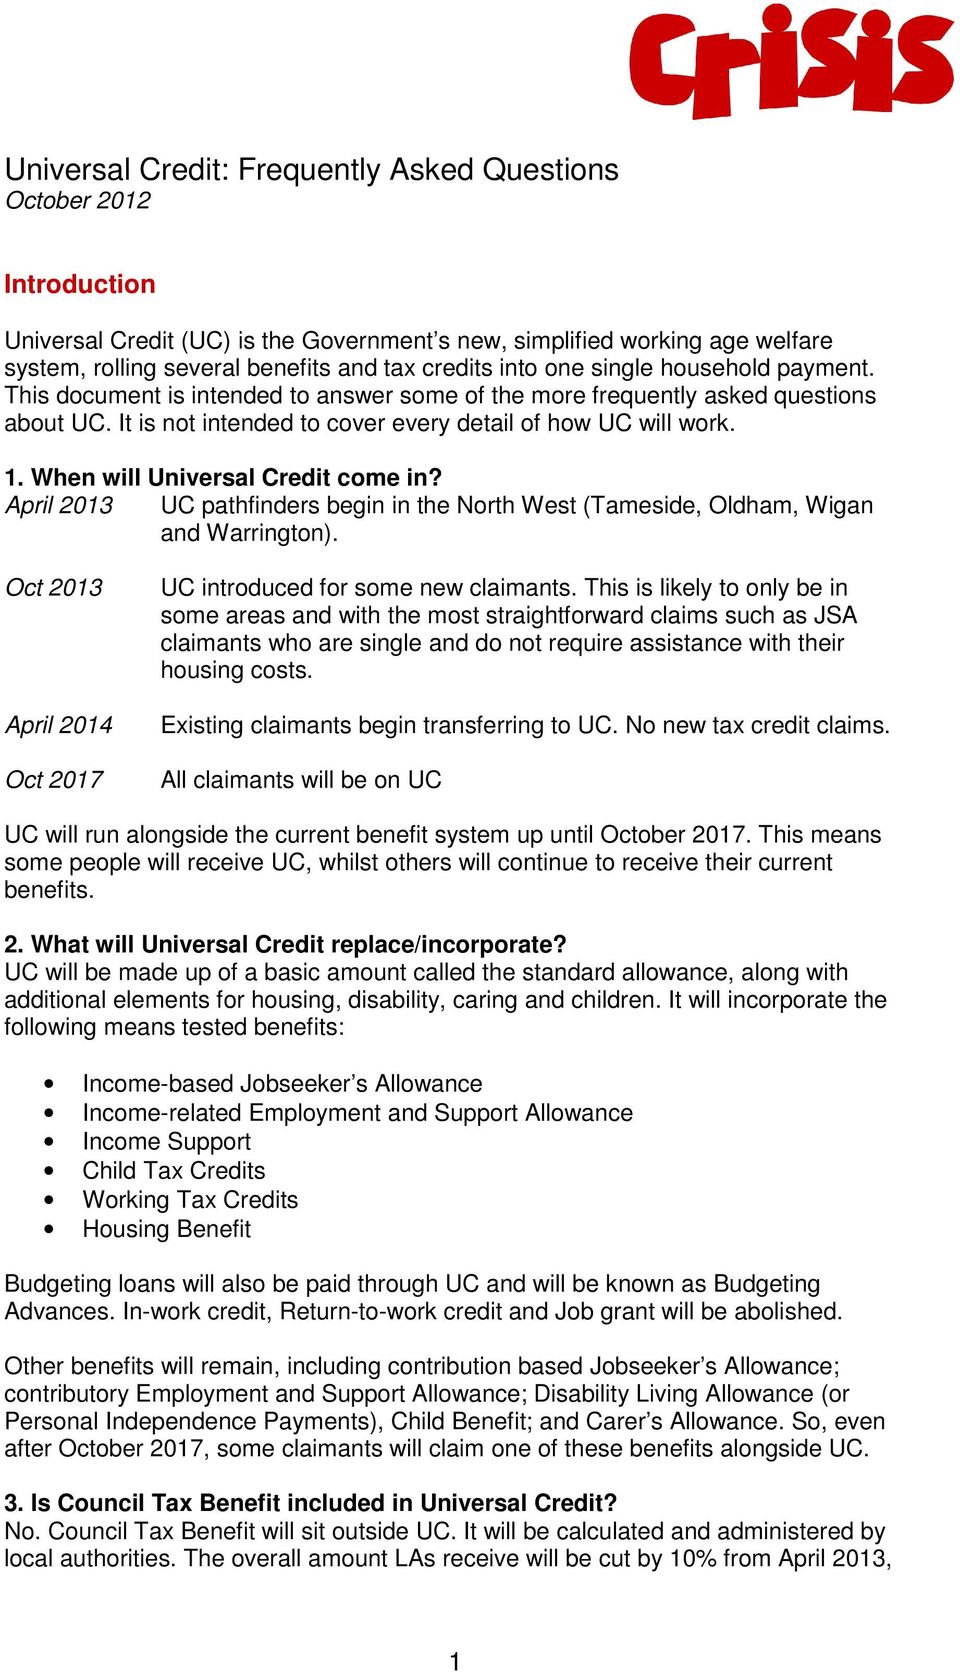 When will Universal Credit come in? April 2013 UC pathfinders begin in the North West (Tameside, Oldham, Wigan and Warrington). Oct 2013 April 2014 Oct 2017 UC introduced for some new claimants.